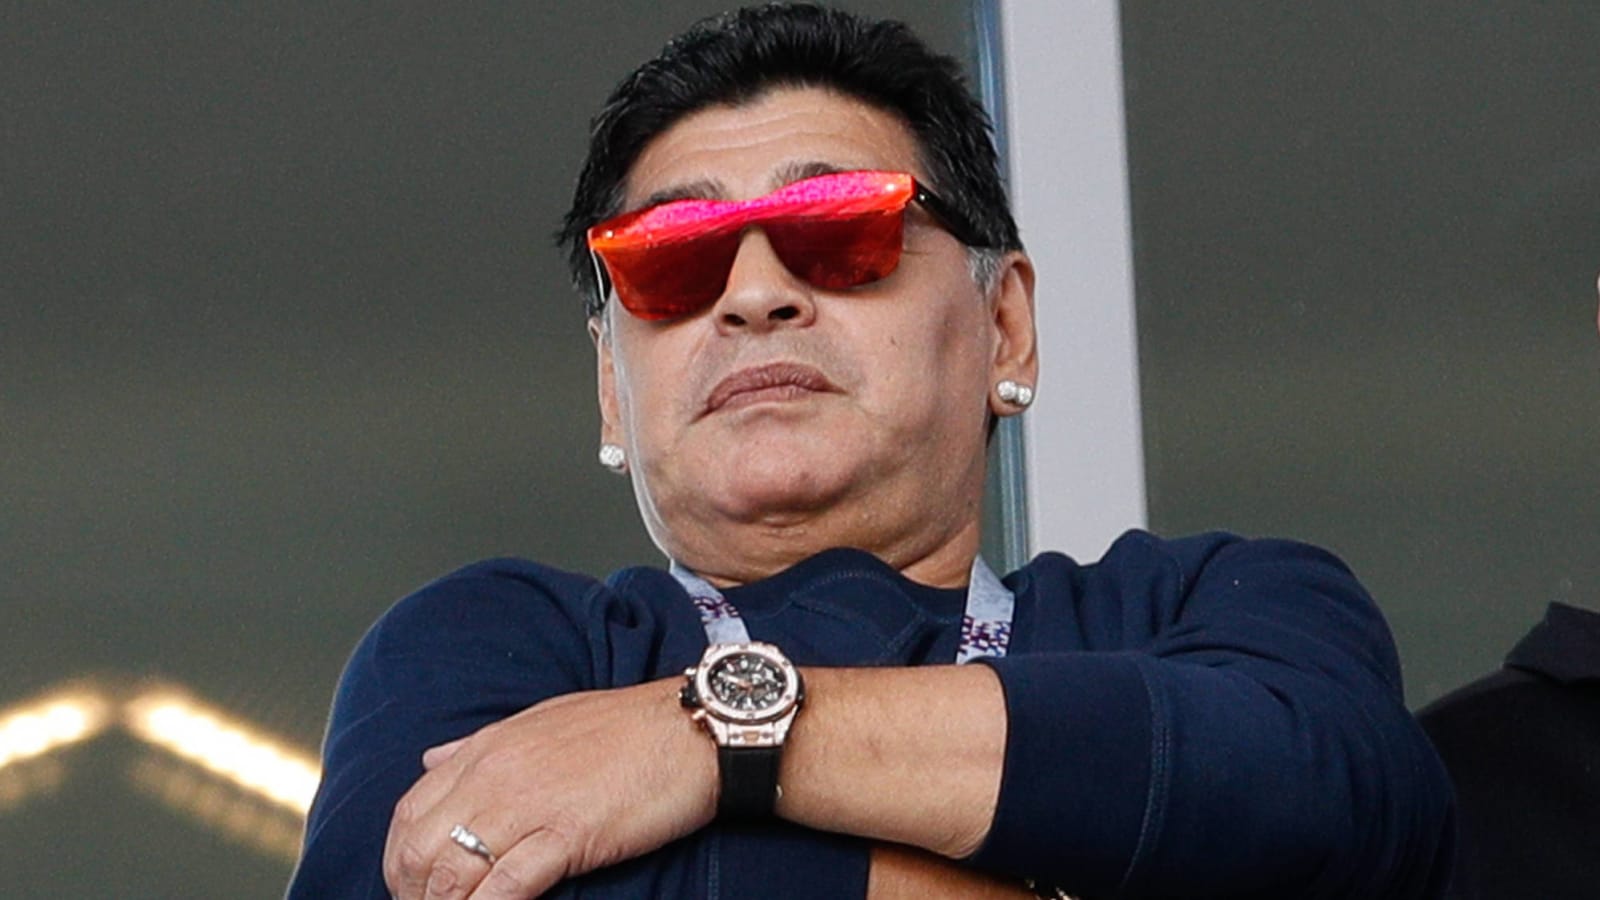 Maradona's medical team acted 'deficient and reckless' before his death